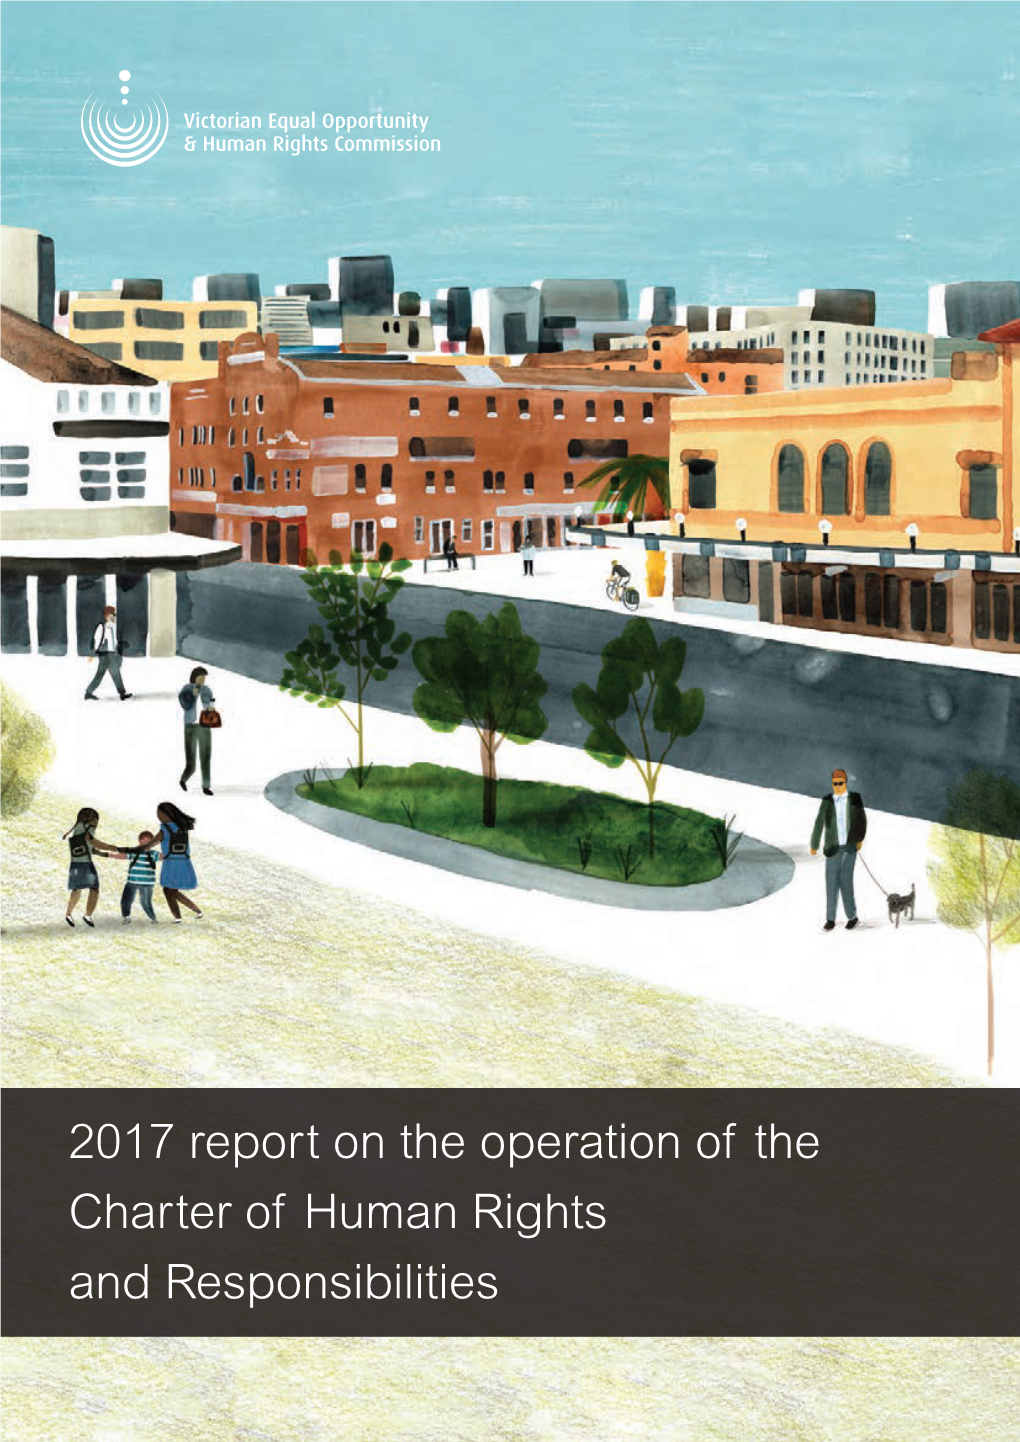 2017 Report on the Operation of the Charter of Human Rights and Responsibilities of the Charter on the Operation of 2017 Report